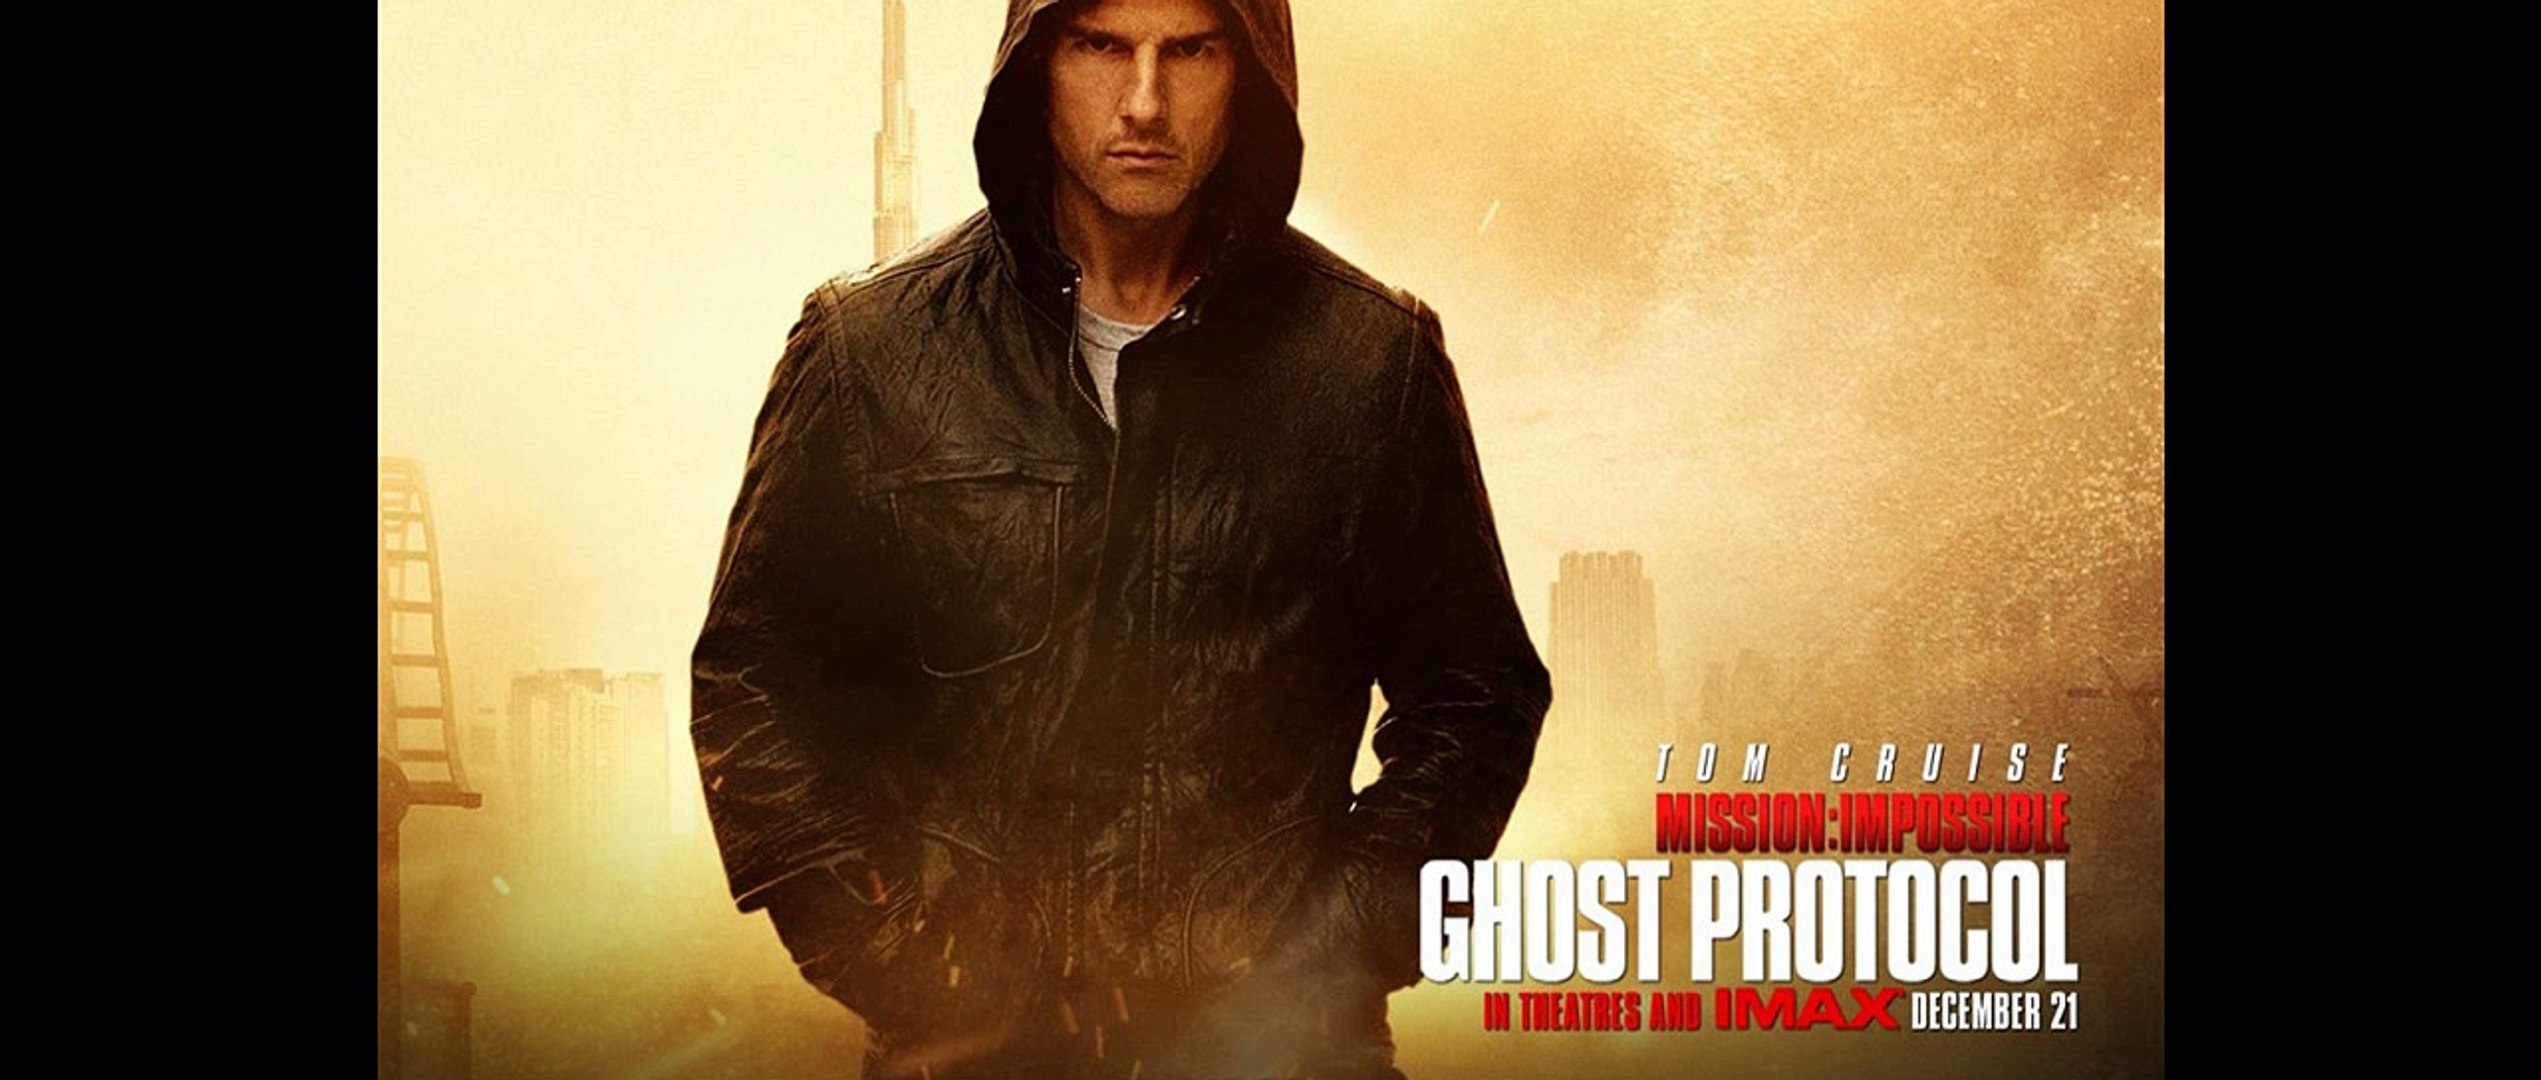 mission impossible 4 full movie free download